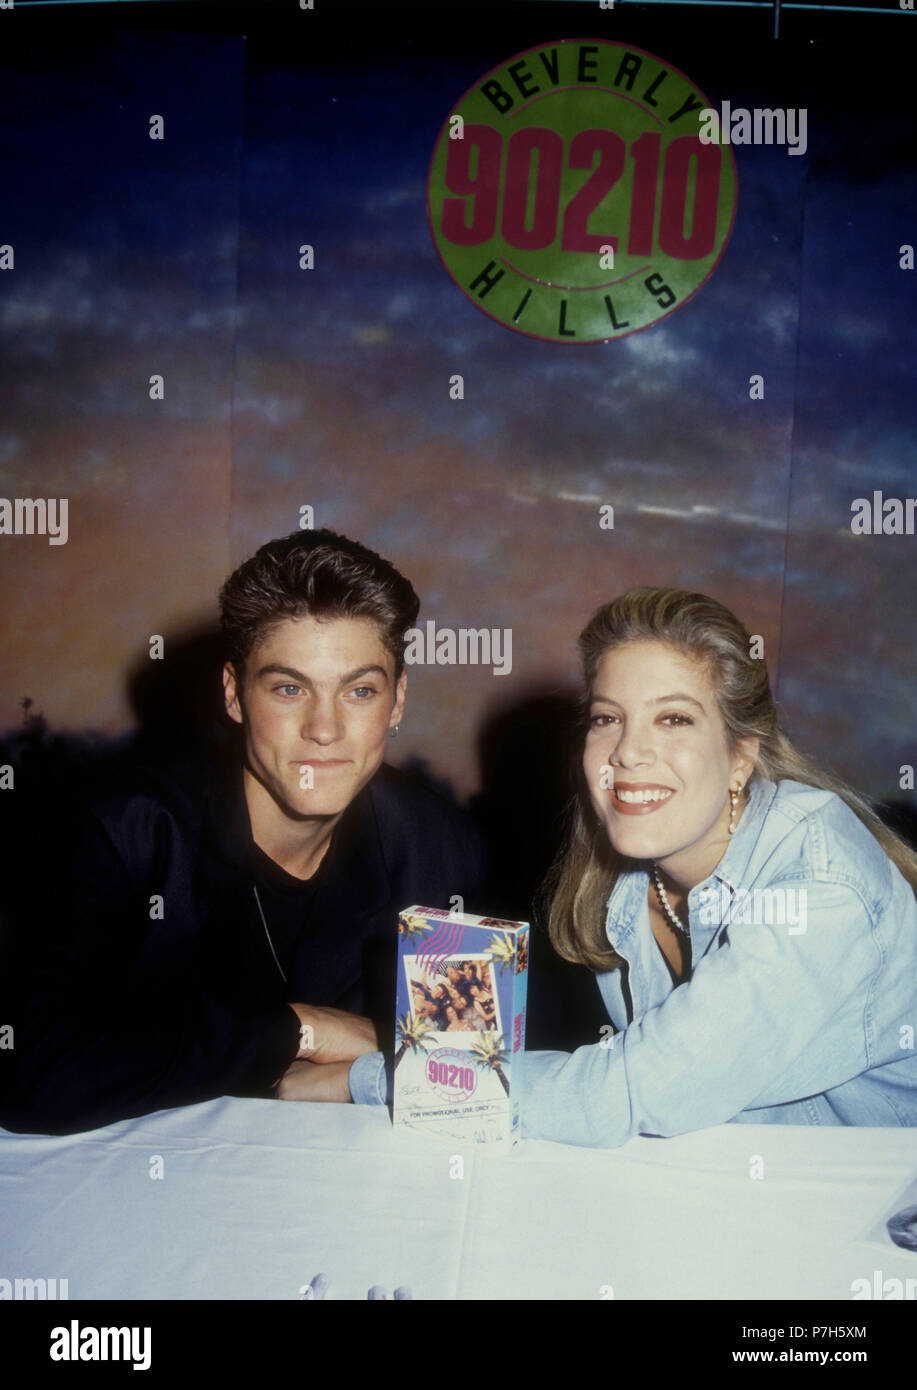 NORTHRIDGE, CA - JANUARY 25: (L-R) Actor Brian Austin Green and actress Tori Spelling attend the launch of the release of 'Beverly Hills, 90210' series pilot on video on January 25, 1992 at the Wherehouse in Northridge, California. Photo by Barry King/Alamy Stock Photo Stock Photo